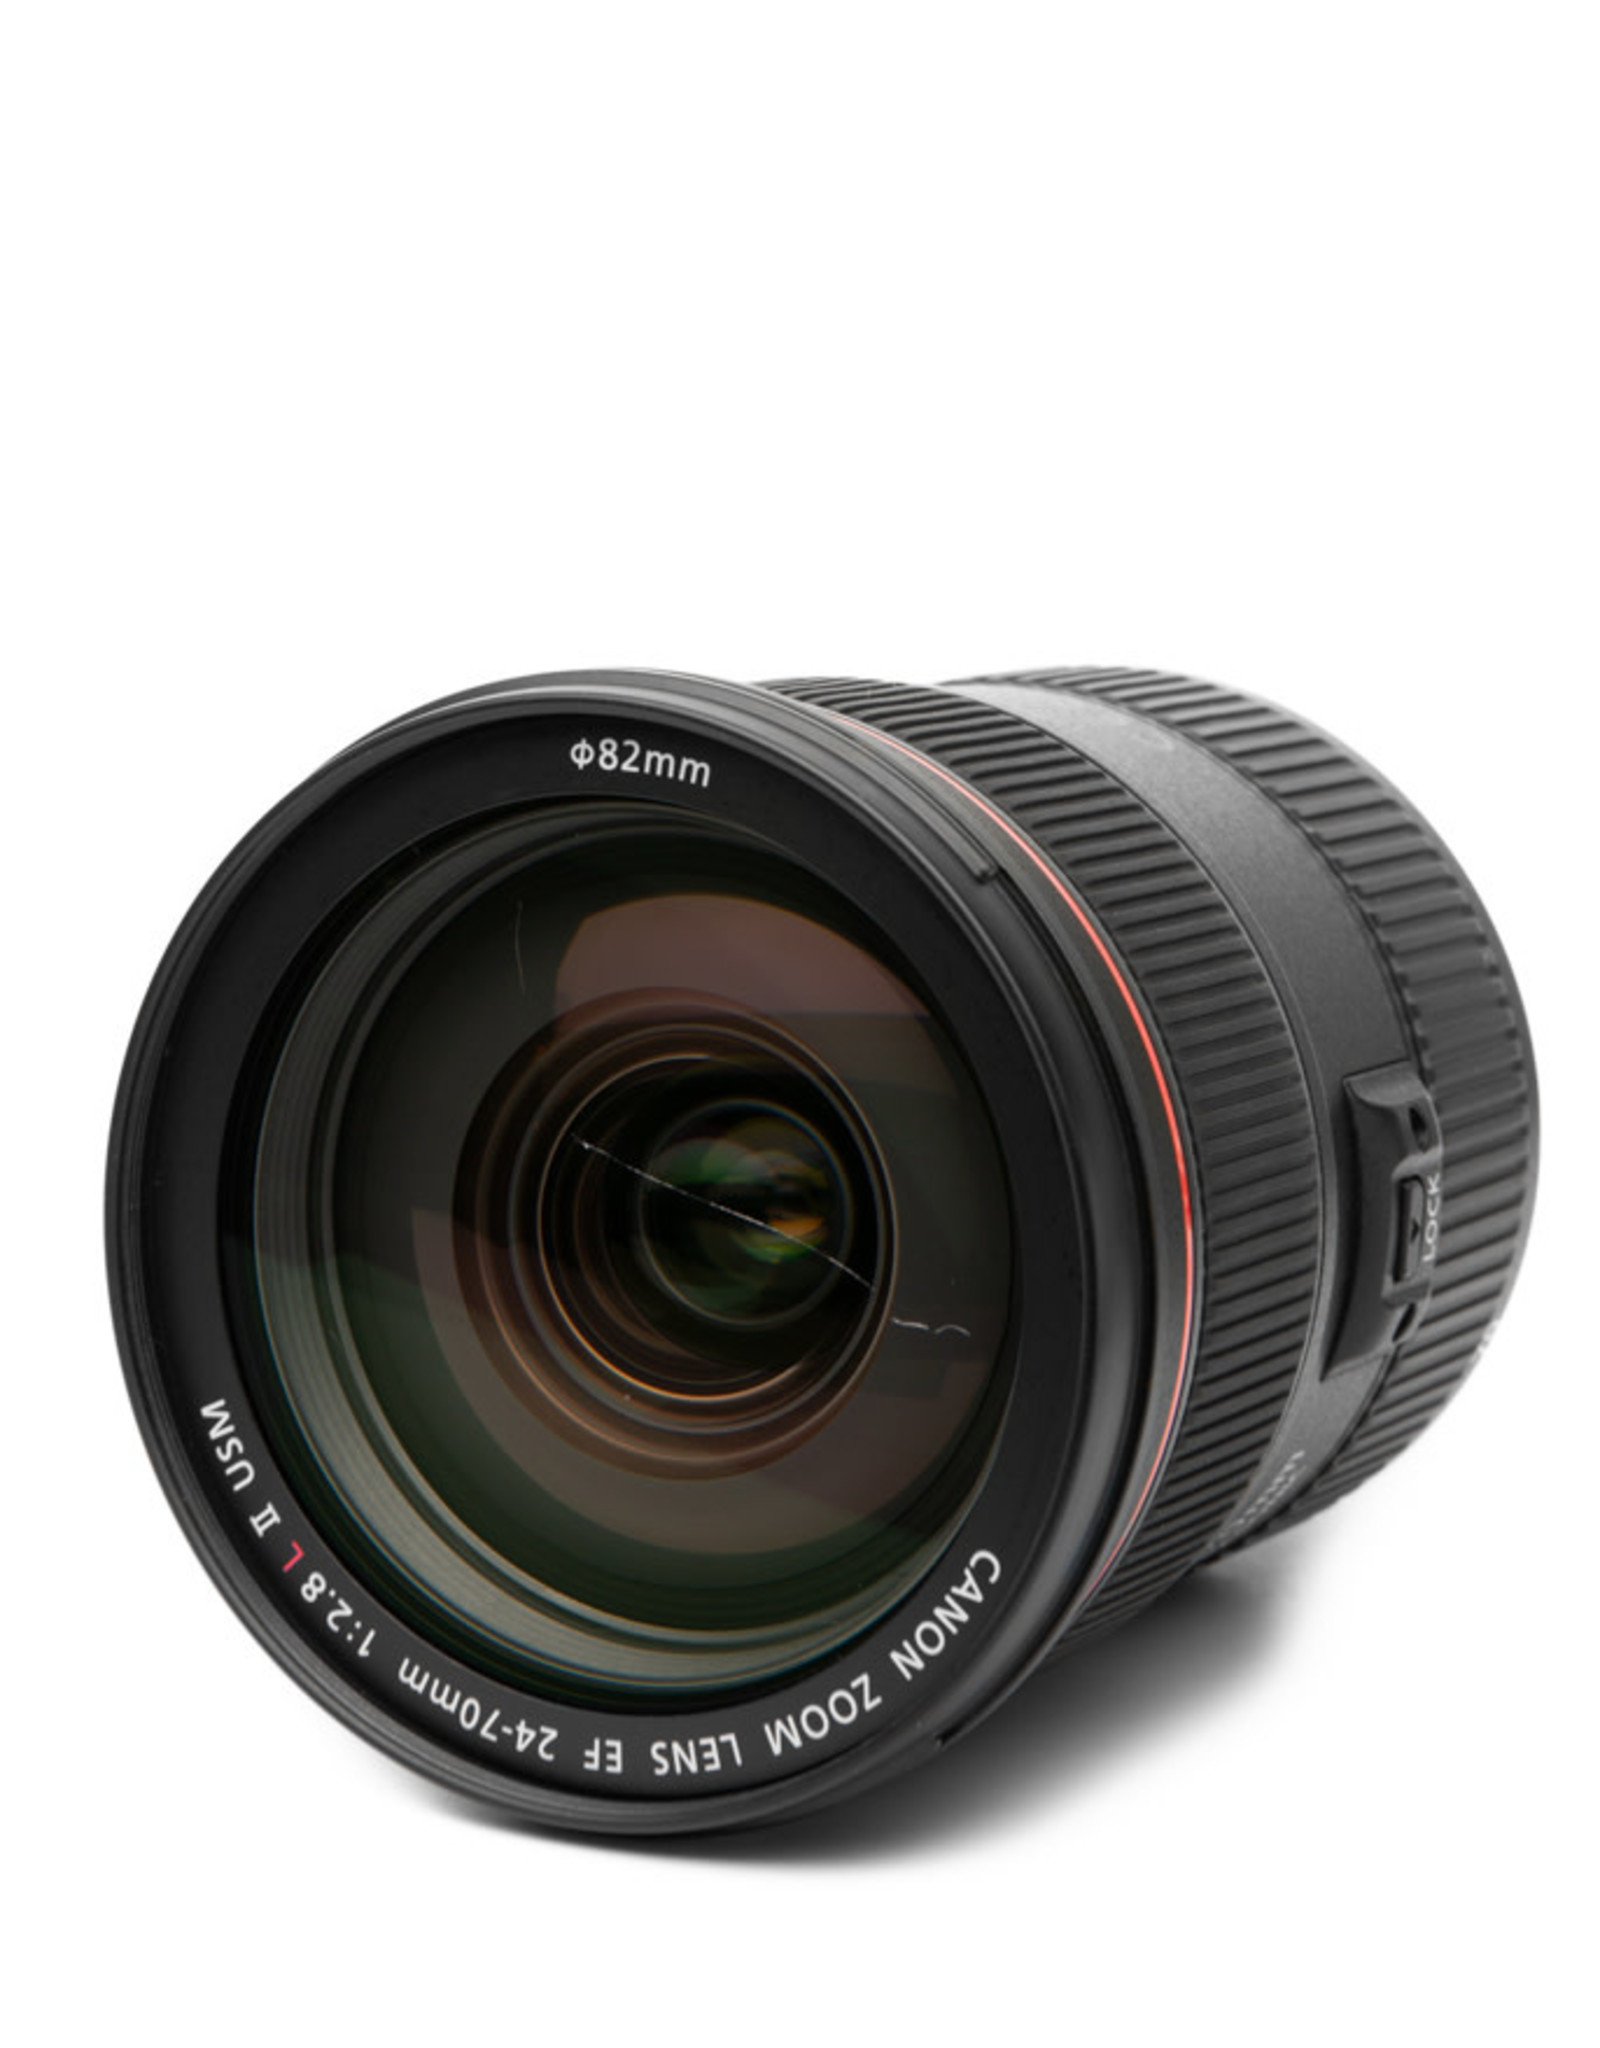 Canon Canon EF 24-70 f/2.8L II USM Zoom Lens (scratch on front element)